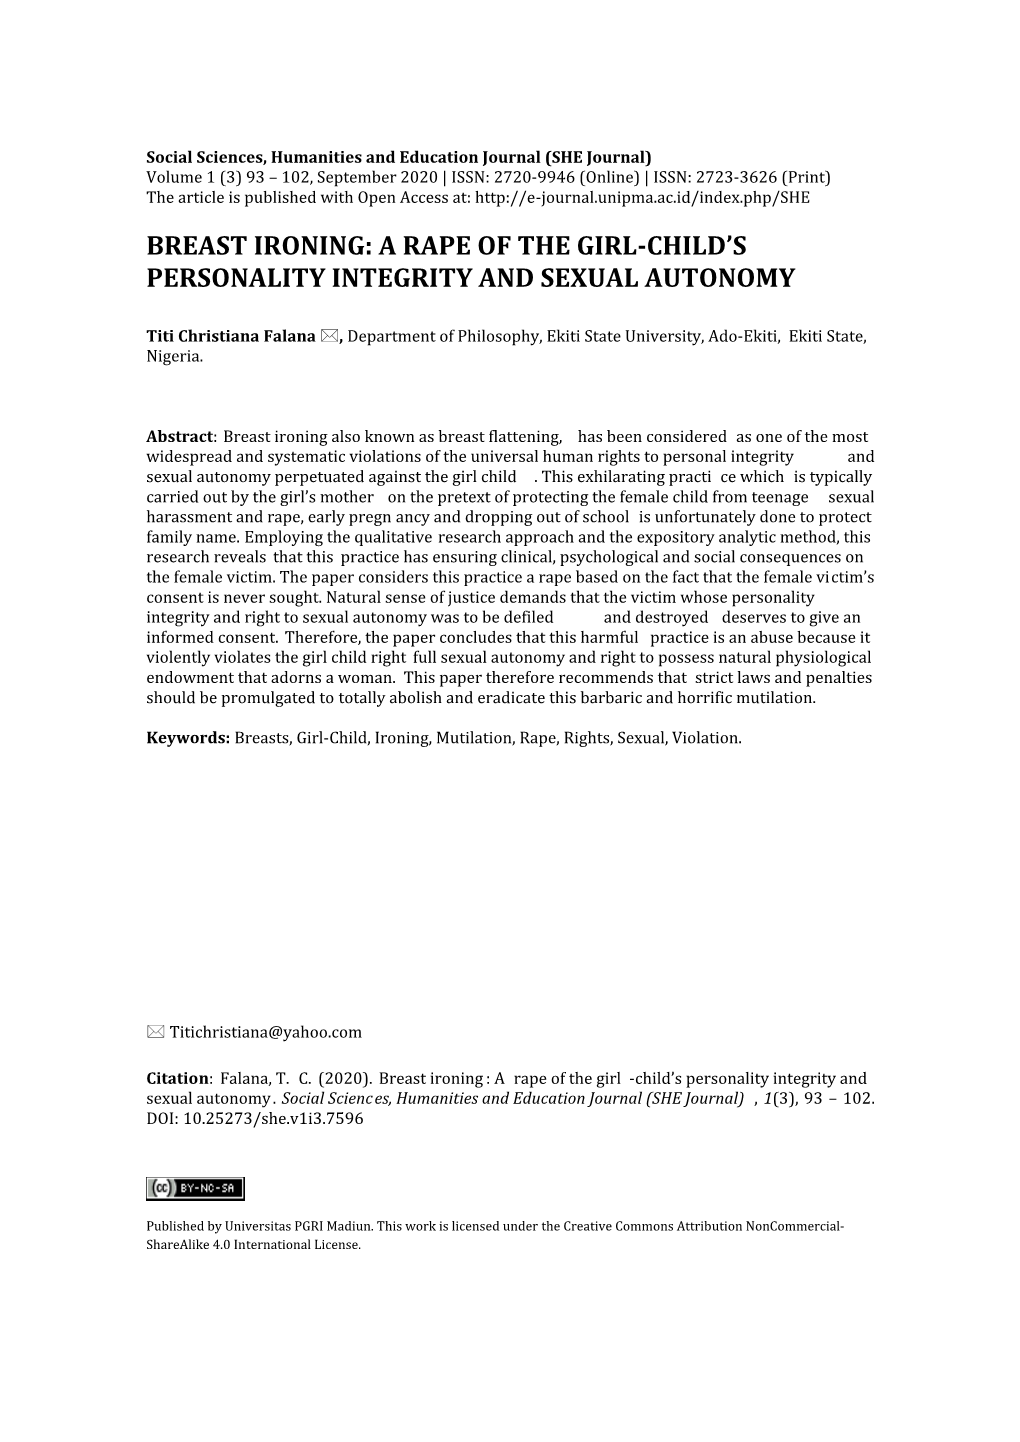 Breast Ironing: a Rape of the Girl-Child's Personality